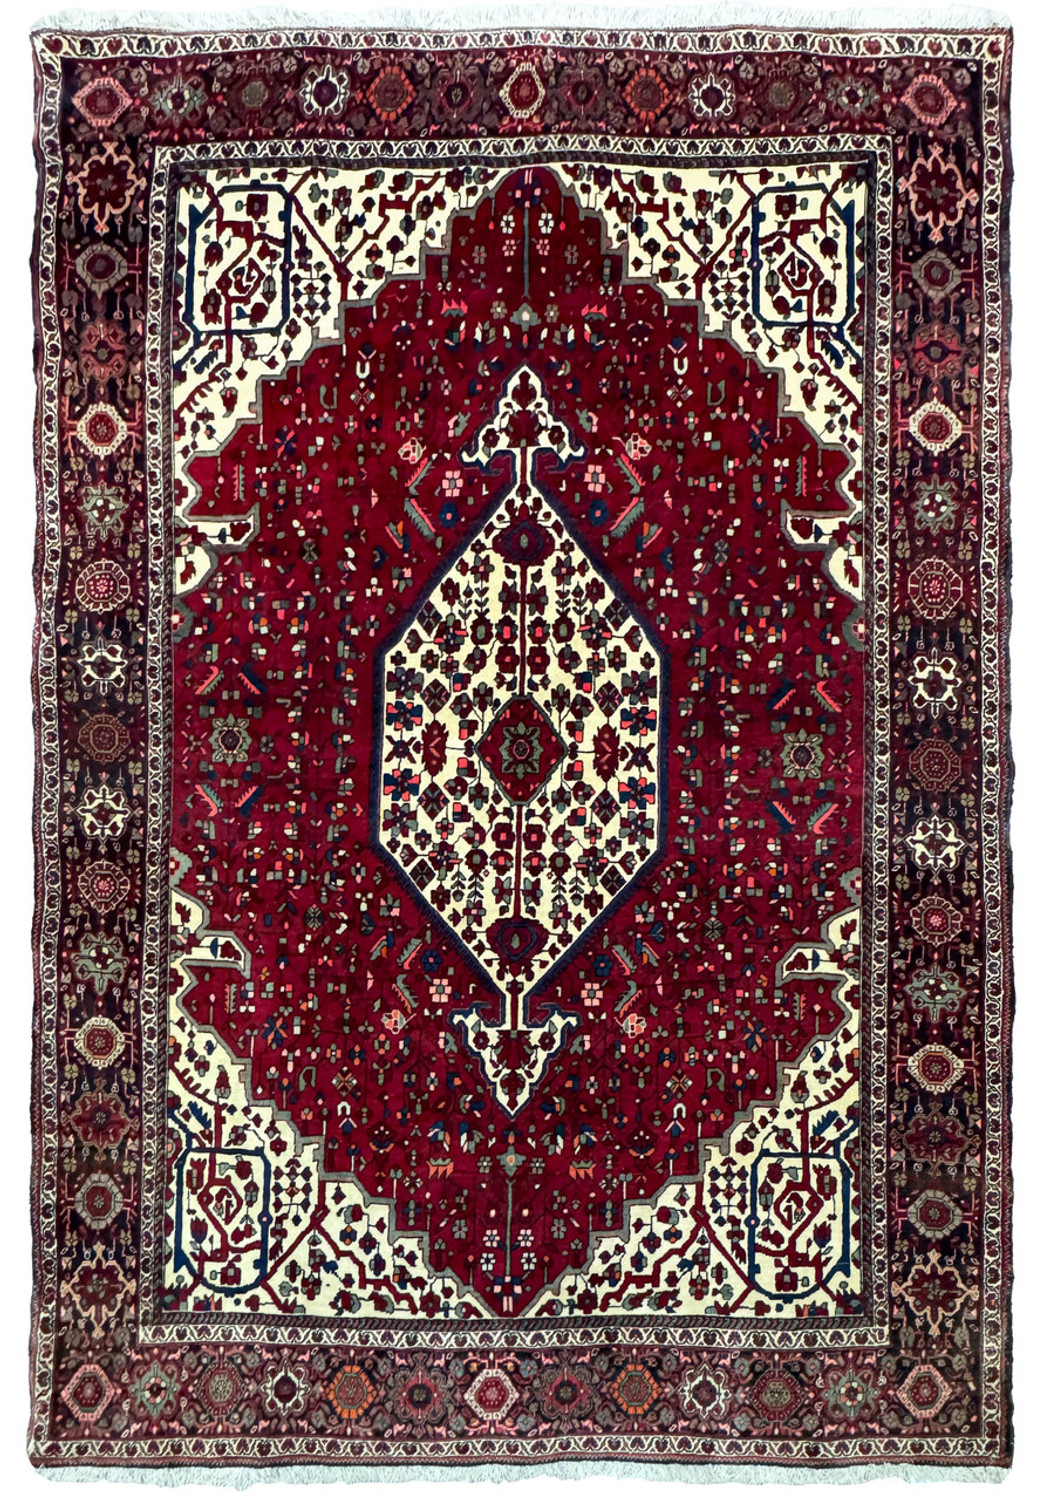 Overhead view of a 4'7" x 6'7" Persian Qum Kork rug featuring a rich red field with a central floral medallion and intricate cream border